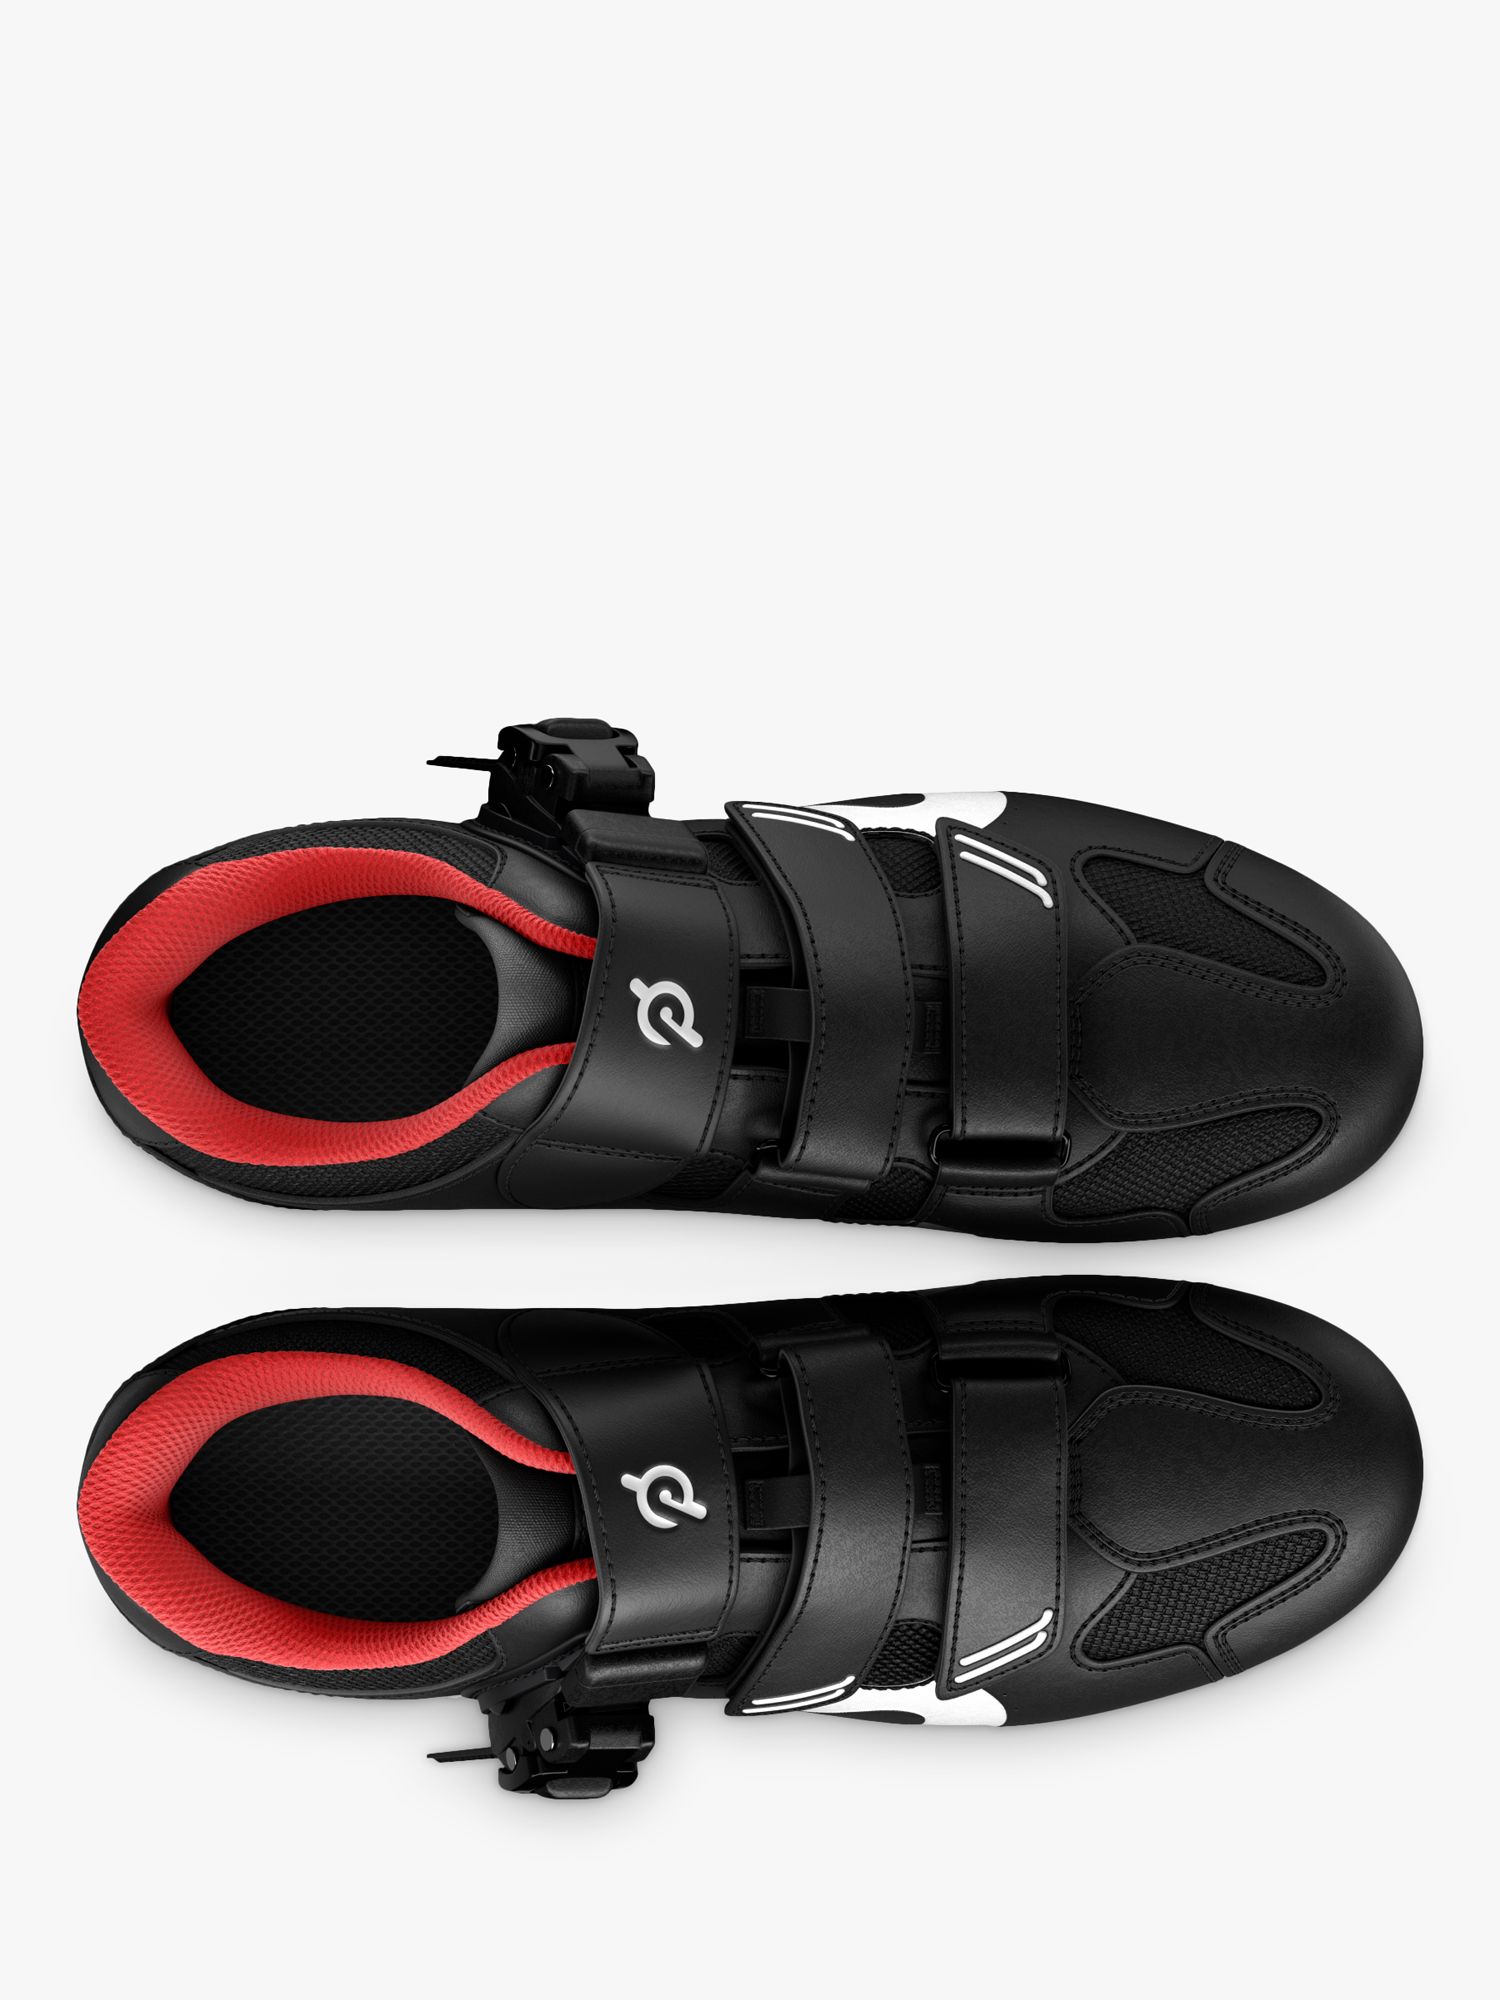 Peloton Cycling Shoes at John Lewis and Partners